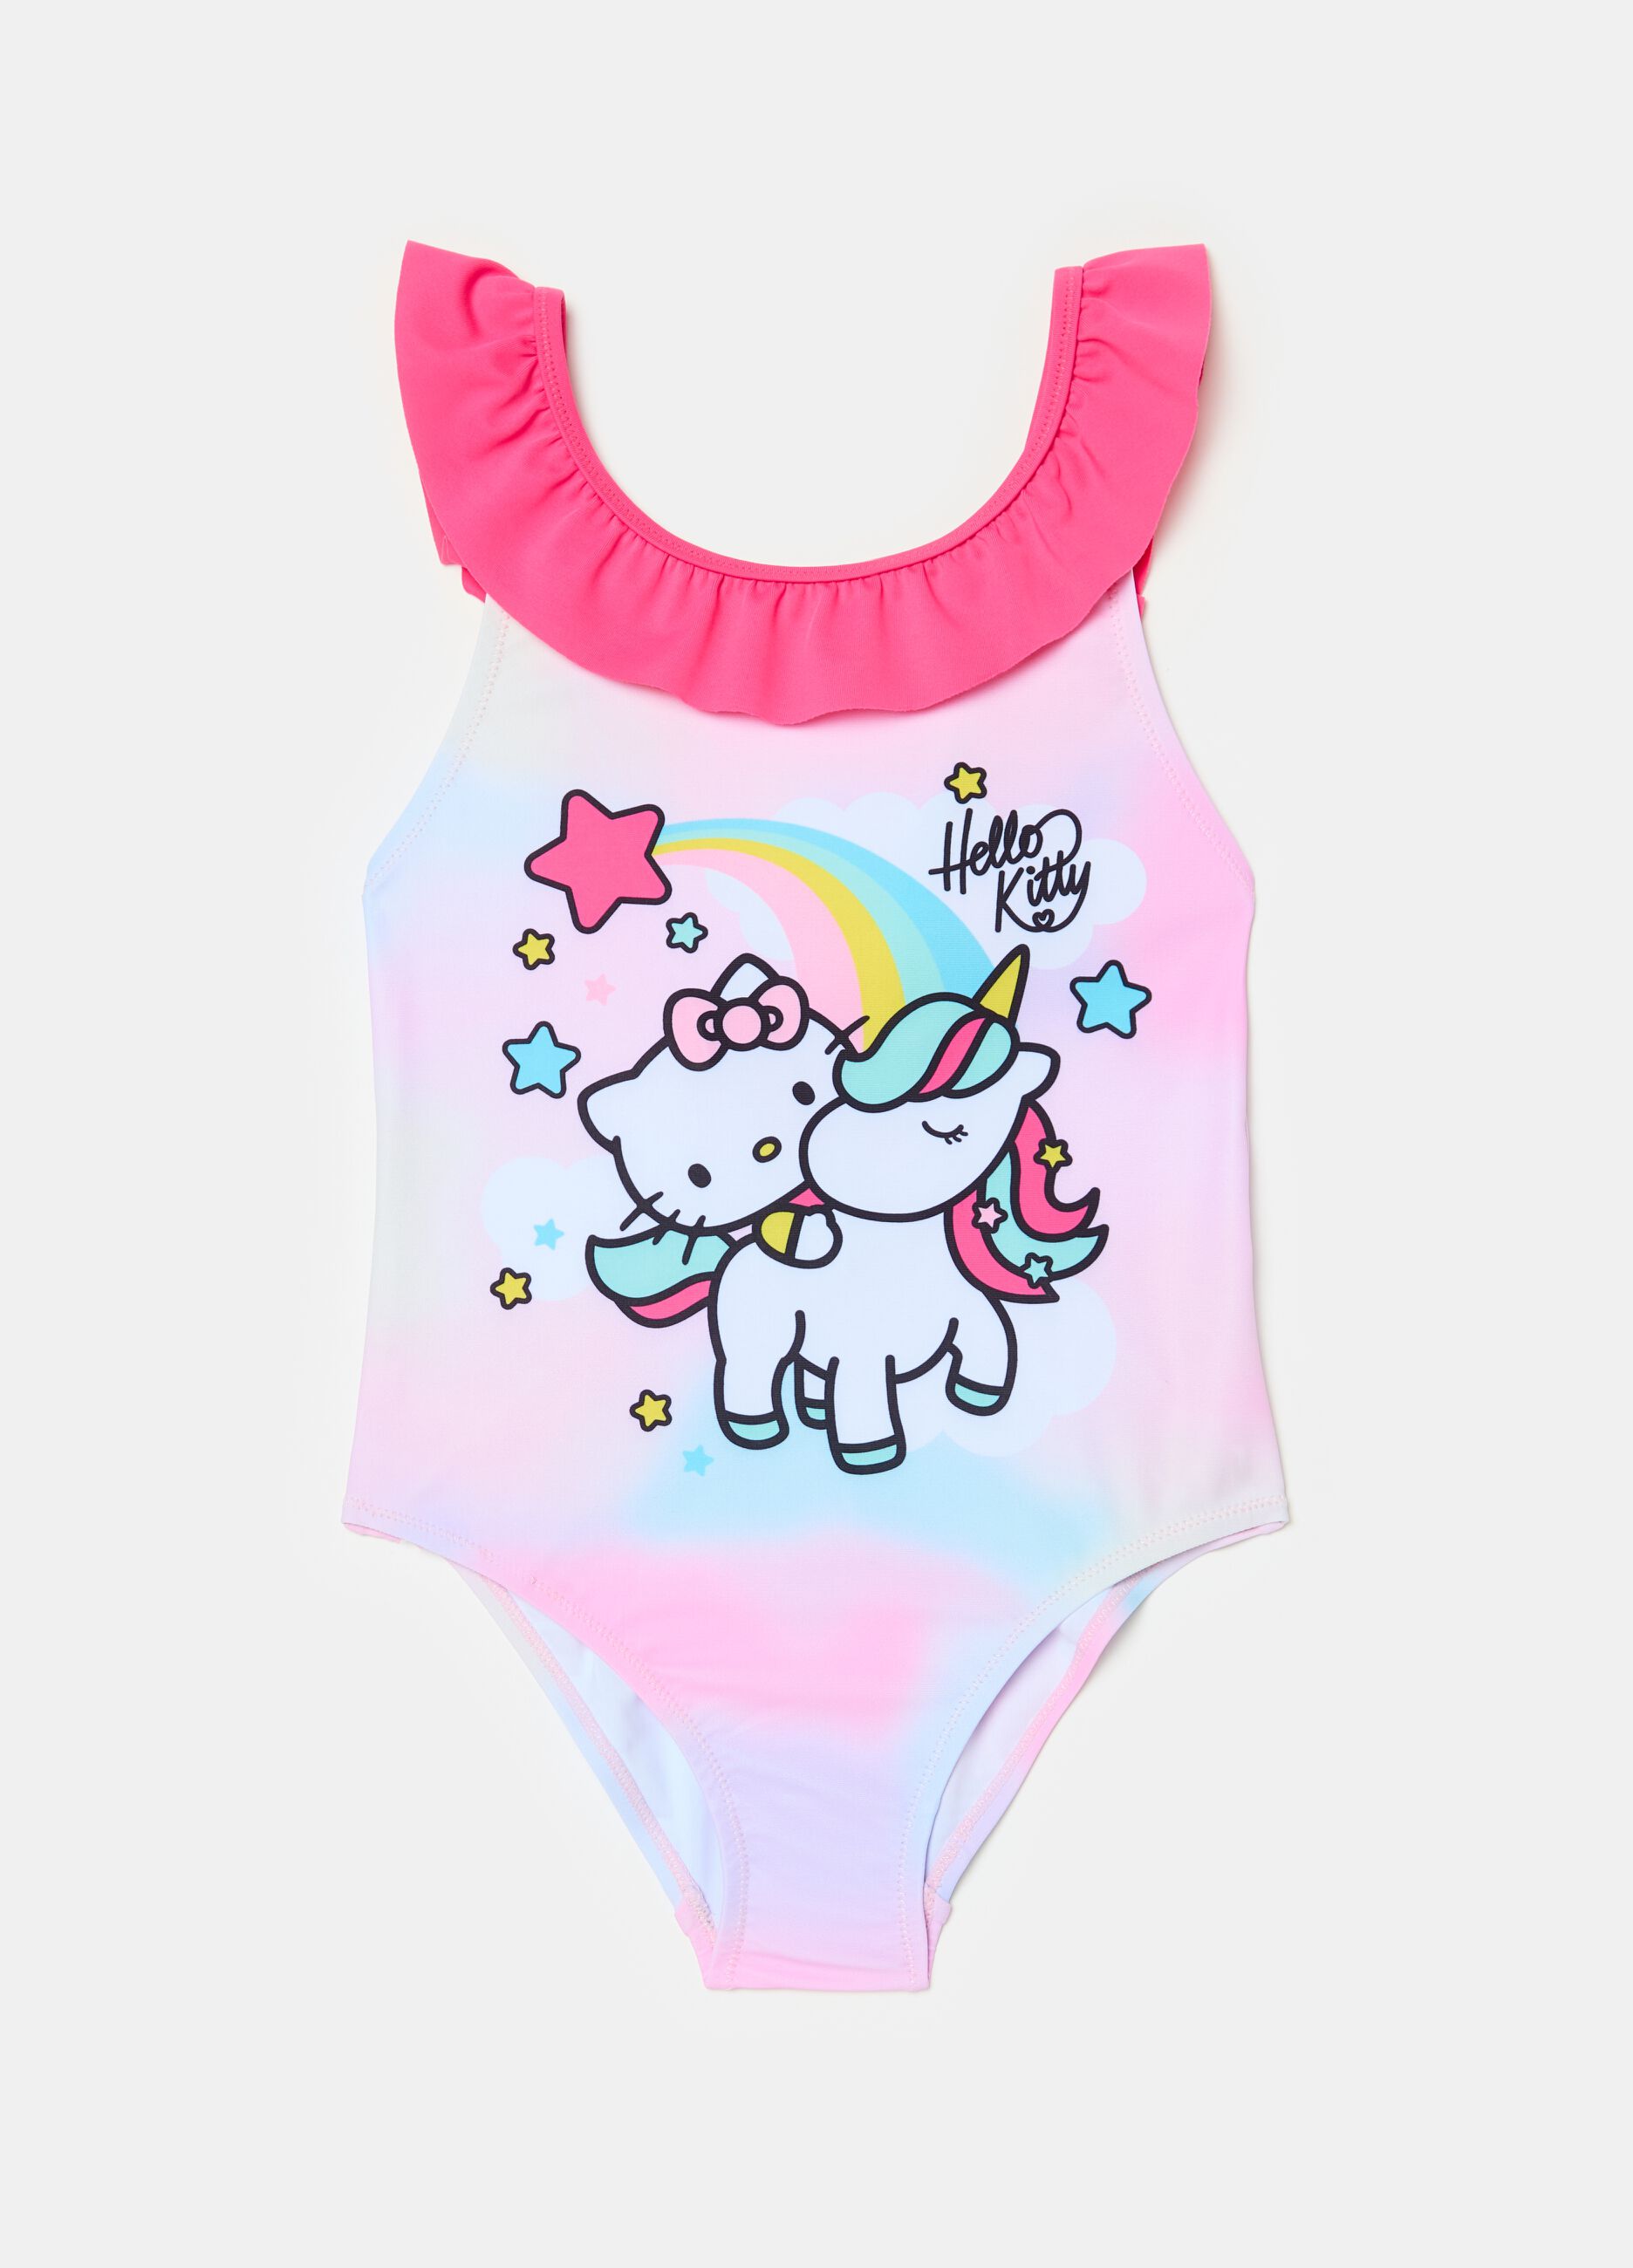 One-piece swimsuit with Hello Kitty print